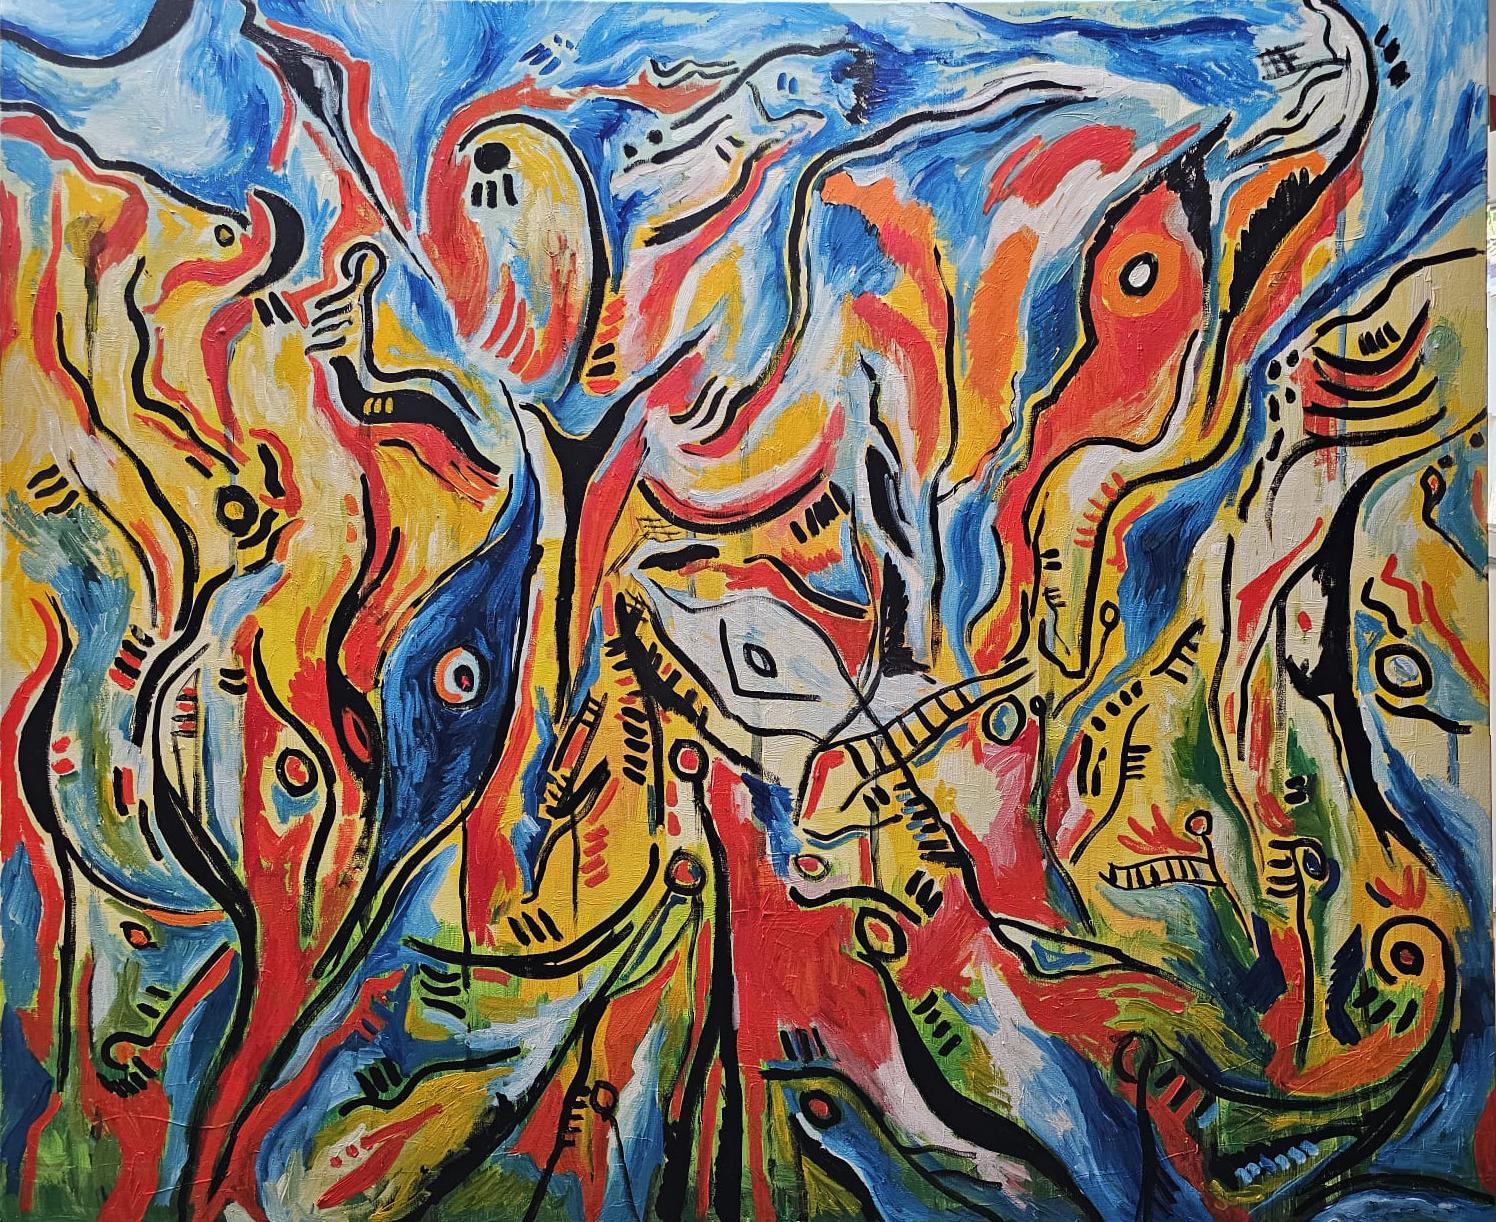 Yuroz Abstract Painting - Joy of Sound